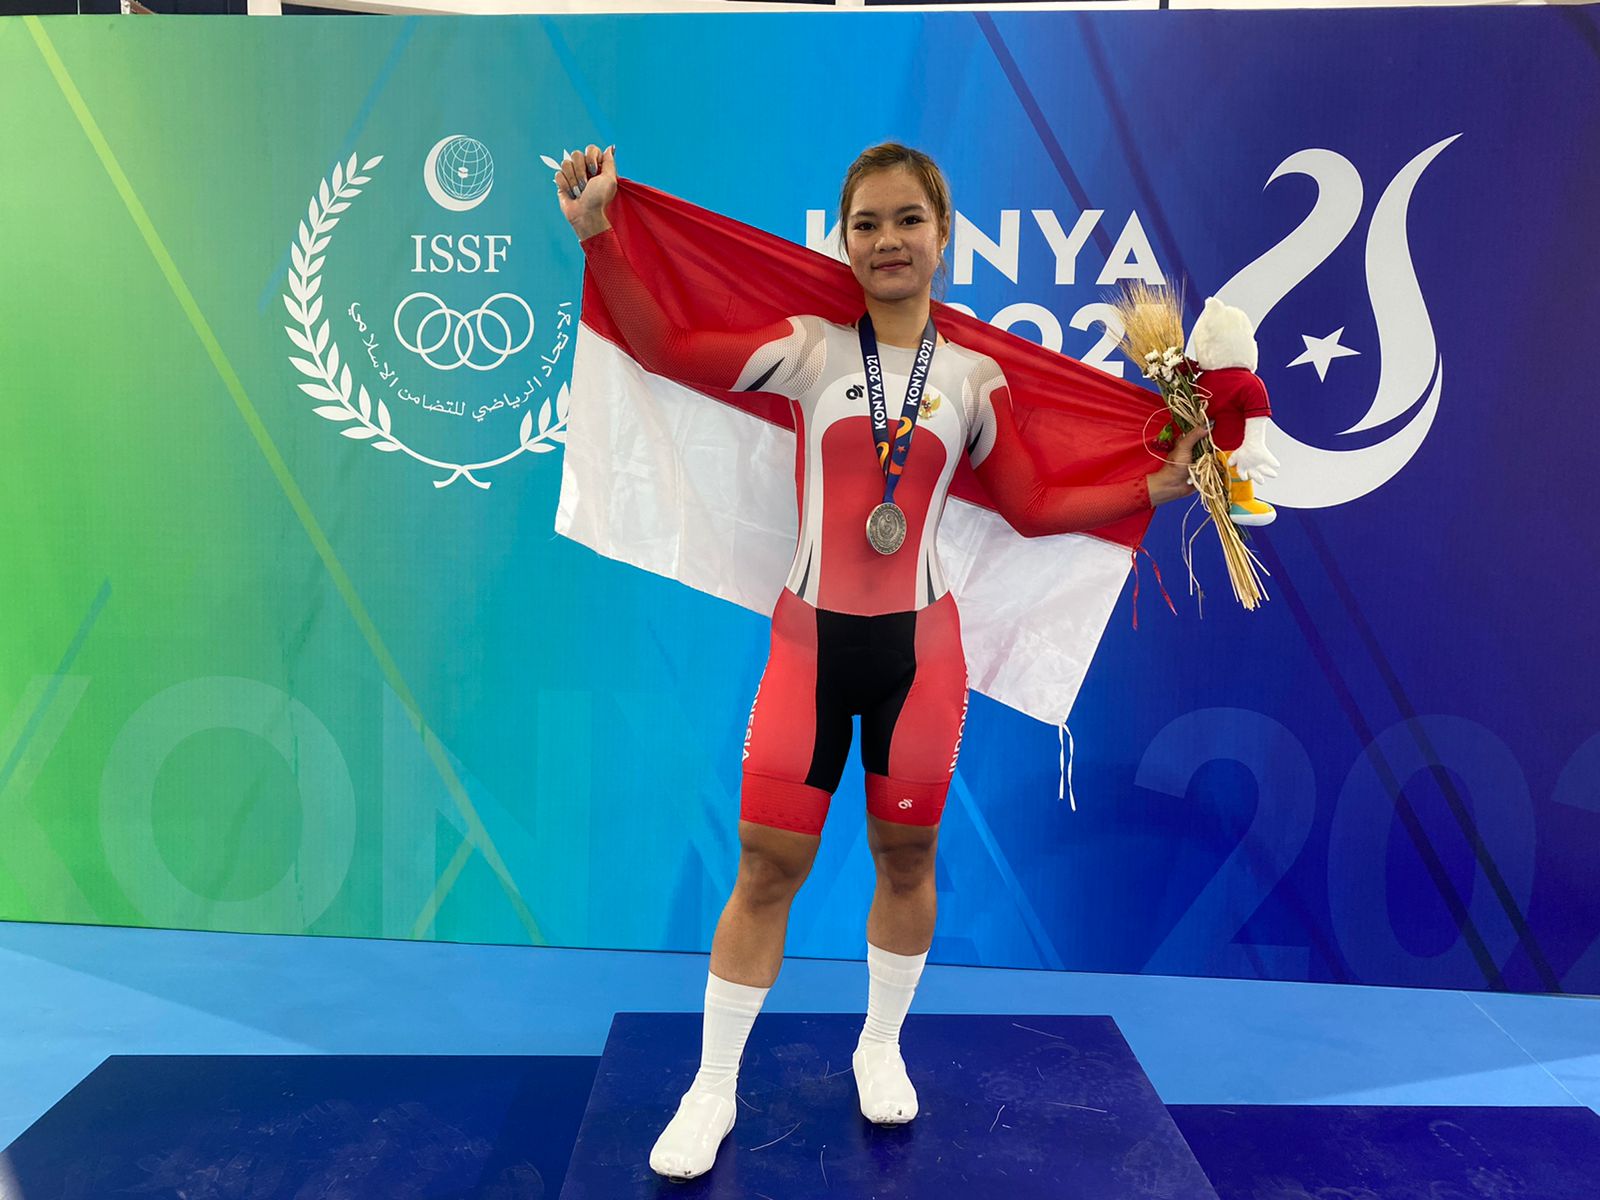 Indonesia Olympic Commitee - The Opening Two Medals Become Positive Capital for the Indonesian Team at ISG